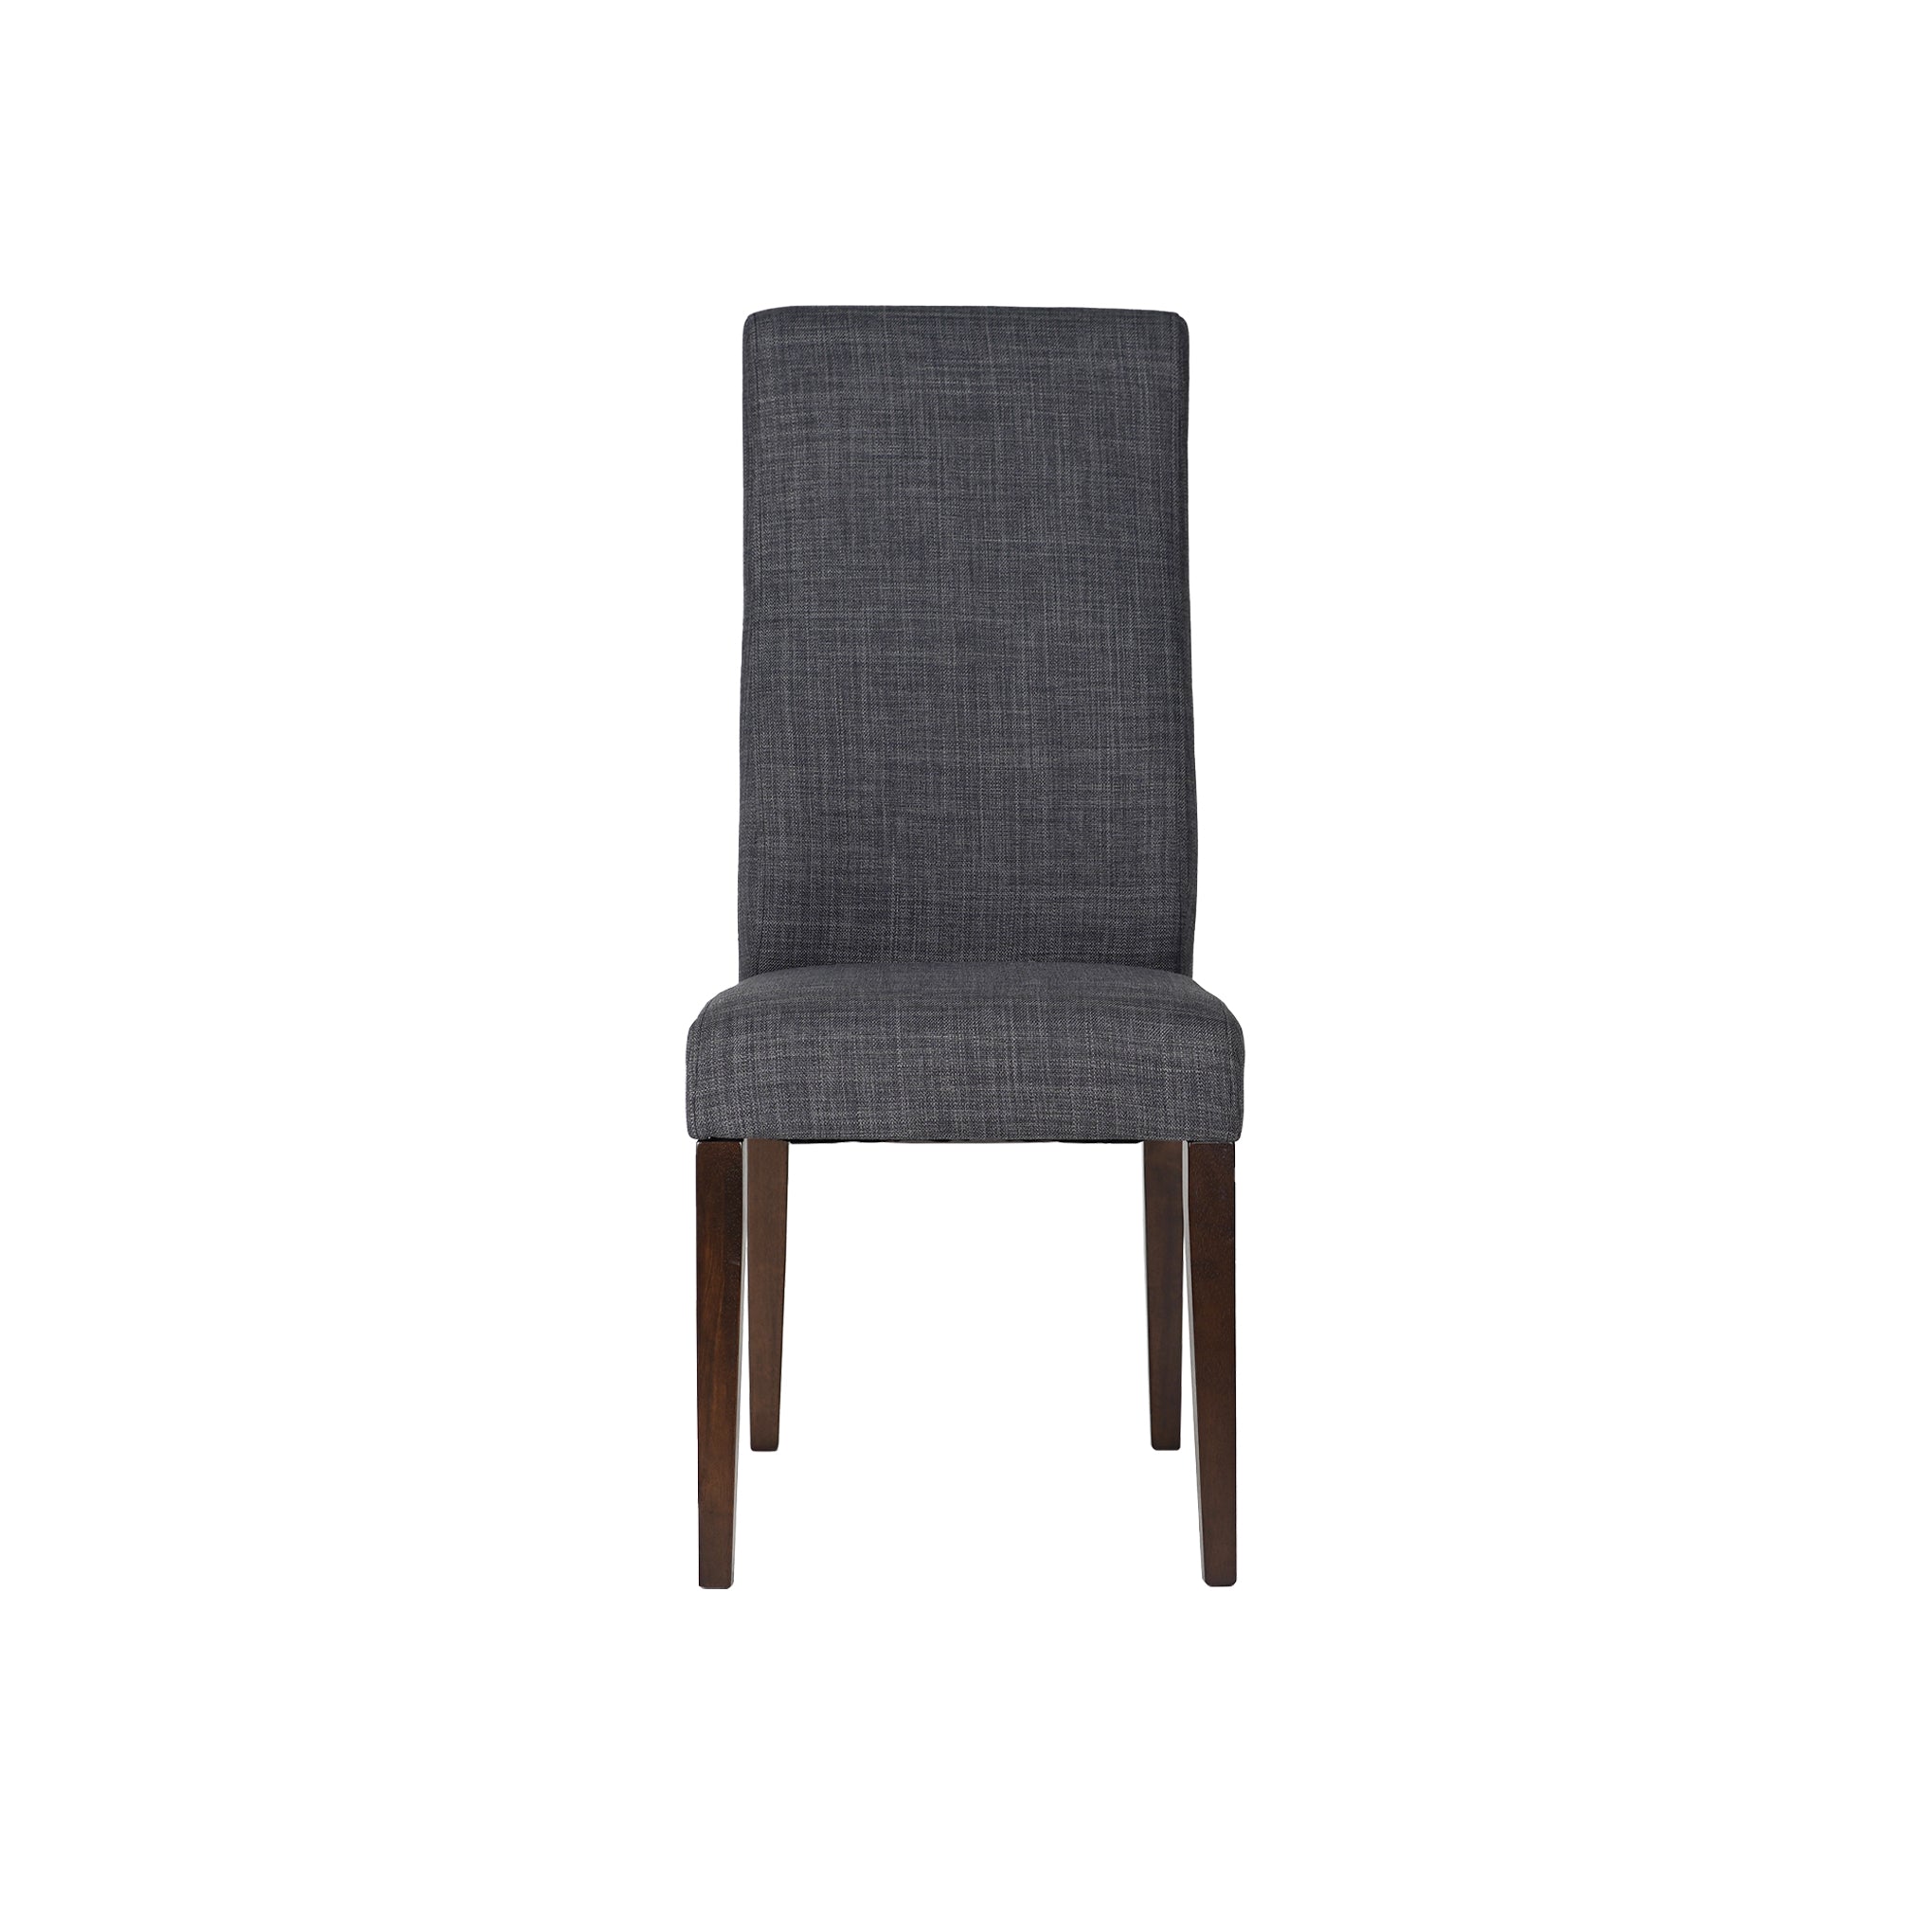 Ines Dining Chair With Cushion Seat